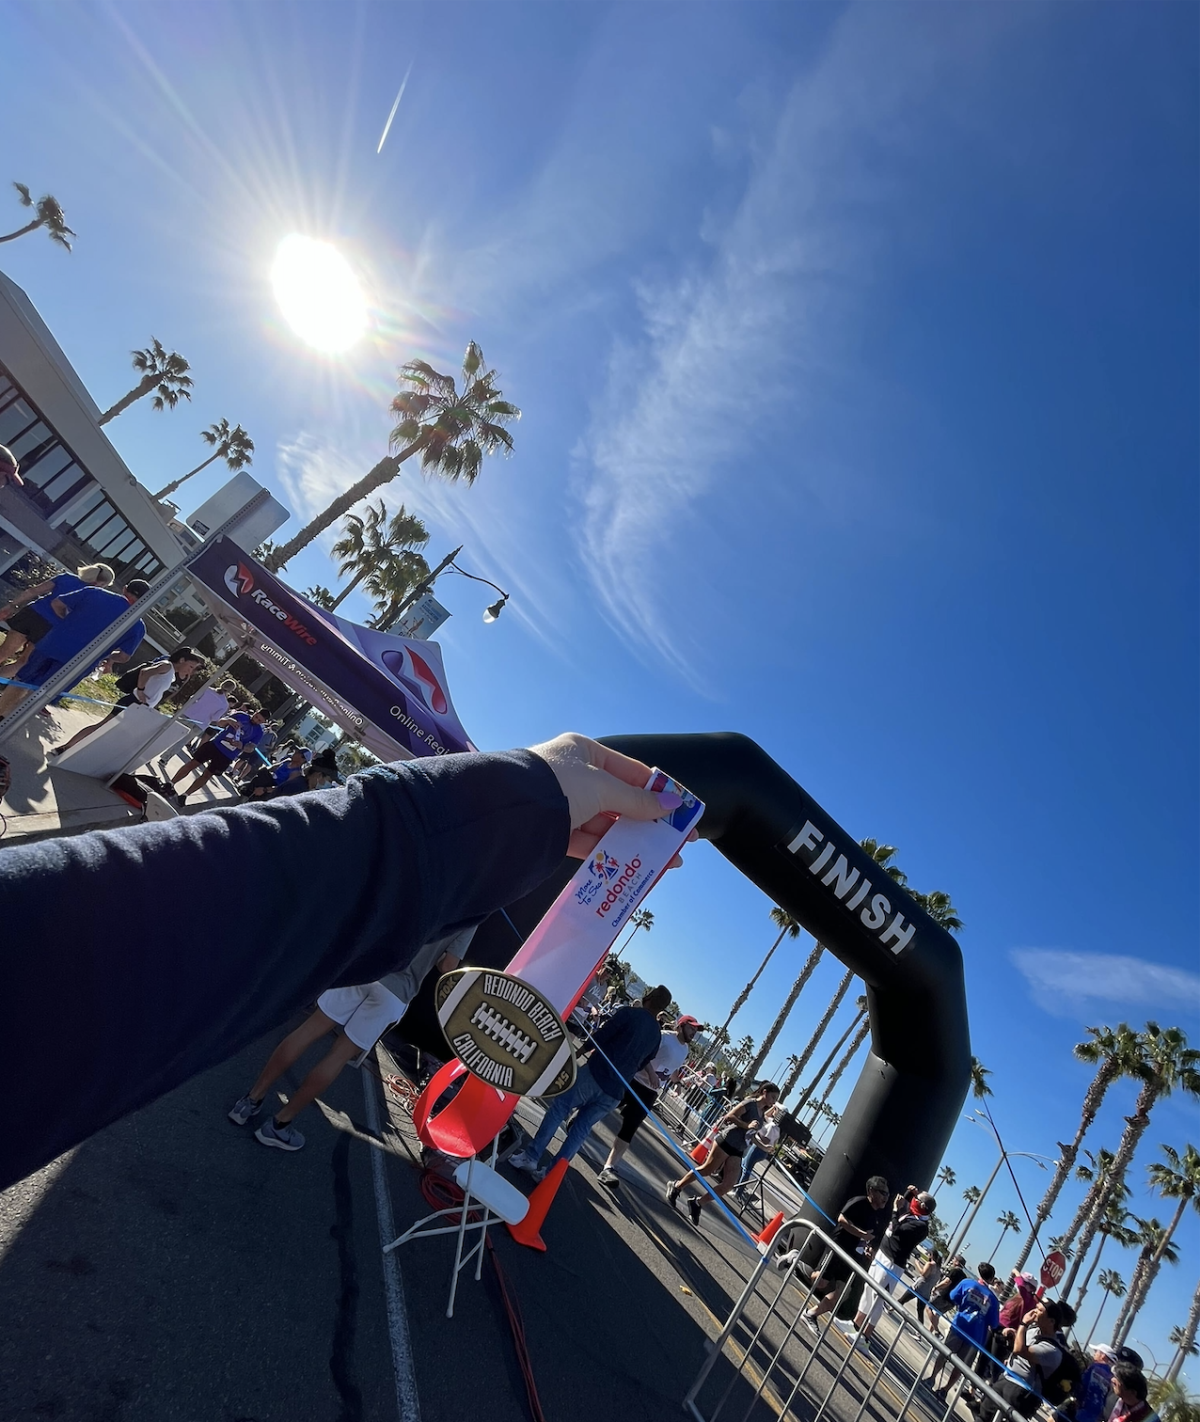 A Super Bowl 10k/5k finisher medal held up in front of the finish line at the Redondo Beach Super Bowl Sunday race